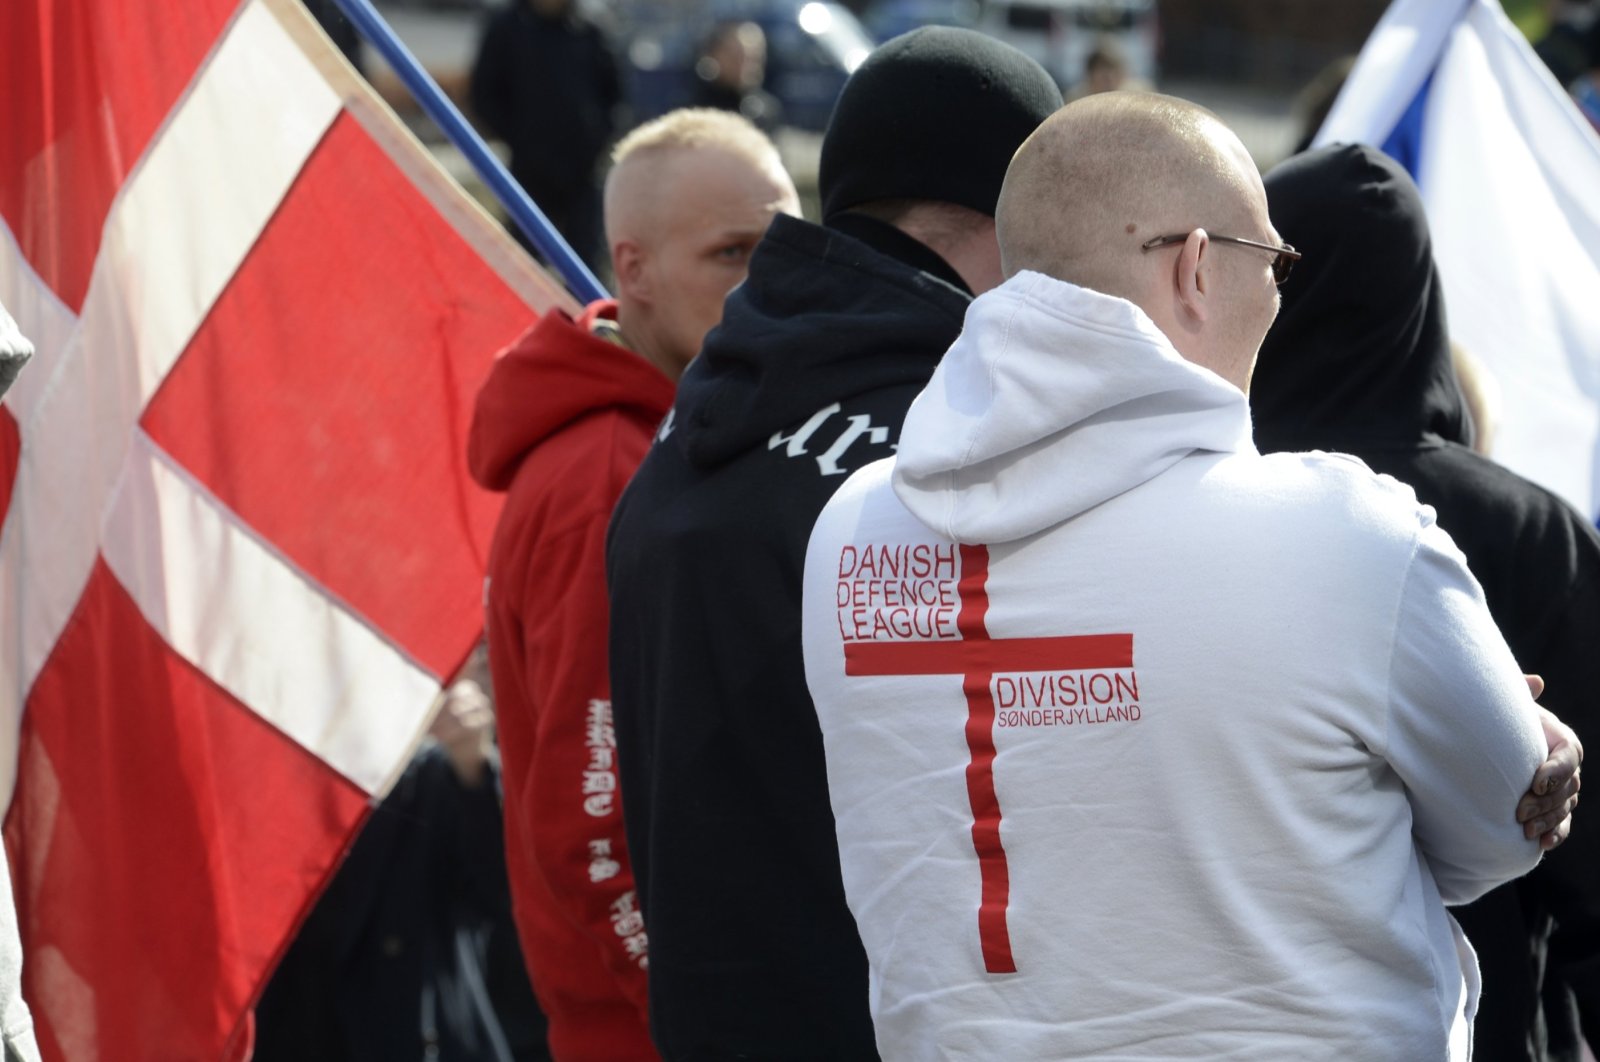 Members of the Danish Defense League gather during a demonstration of right-wing protestors, Aarhus, March 31, 2012. (Reuters File Photo)